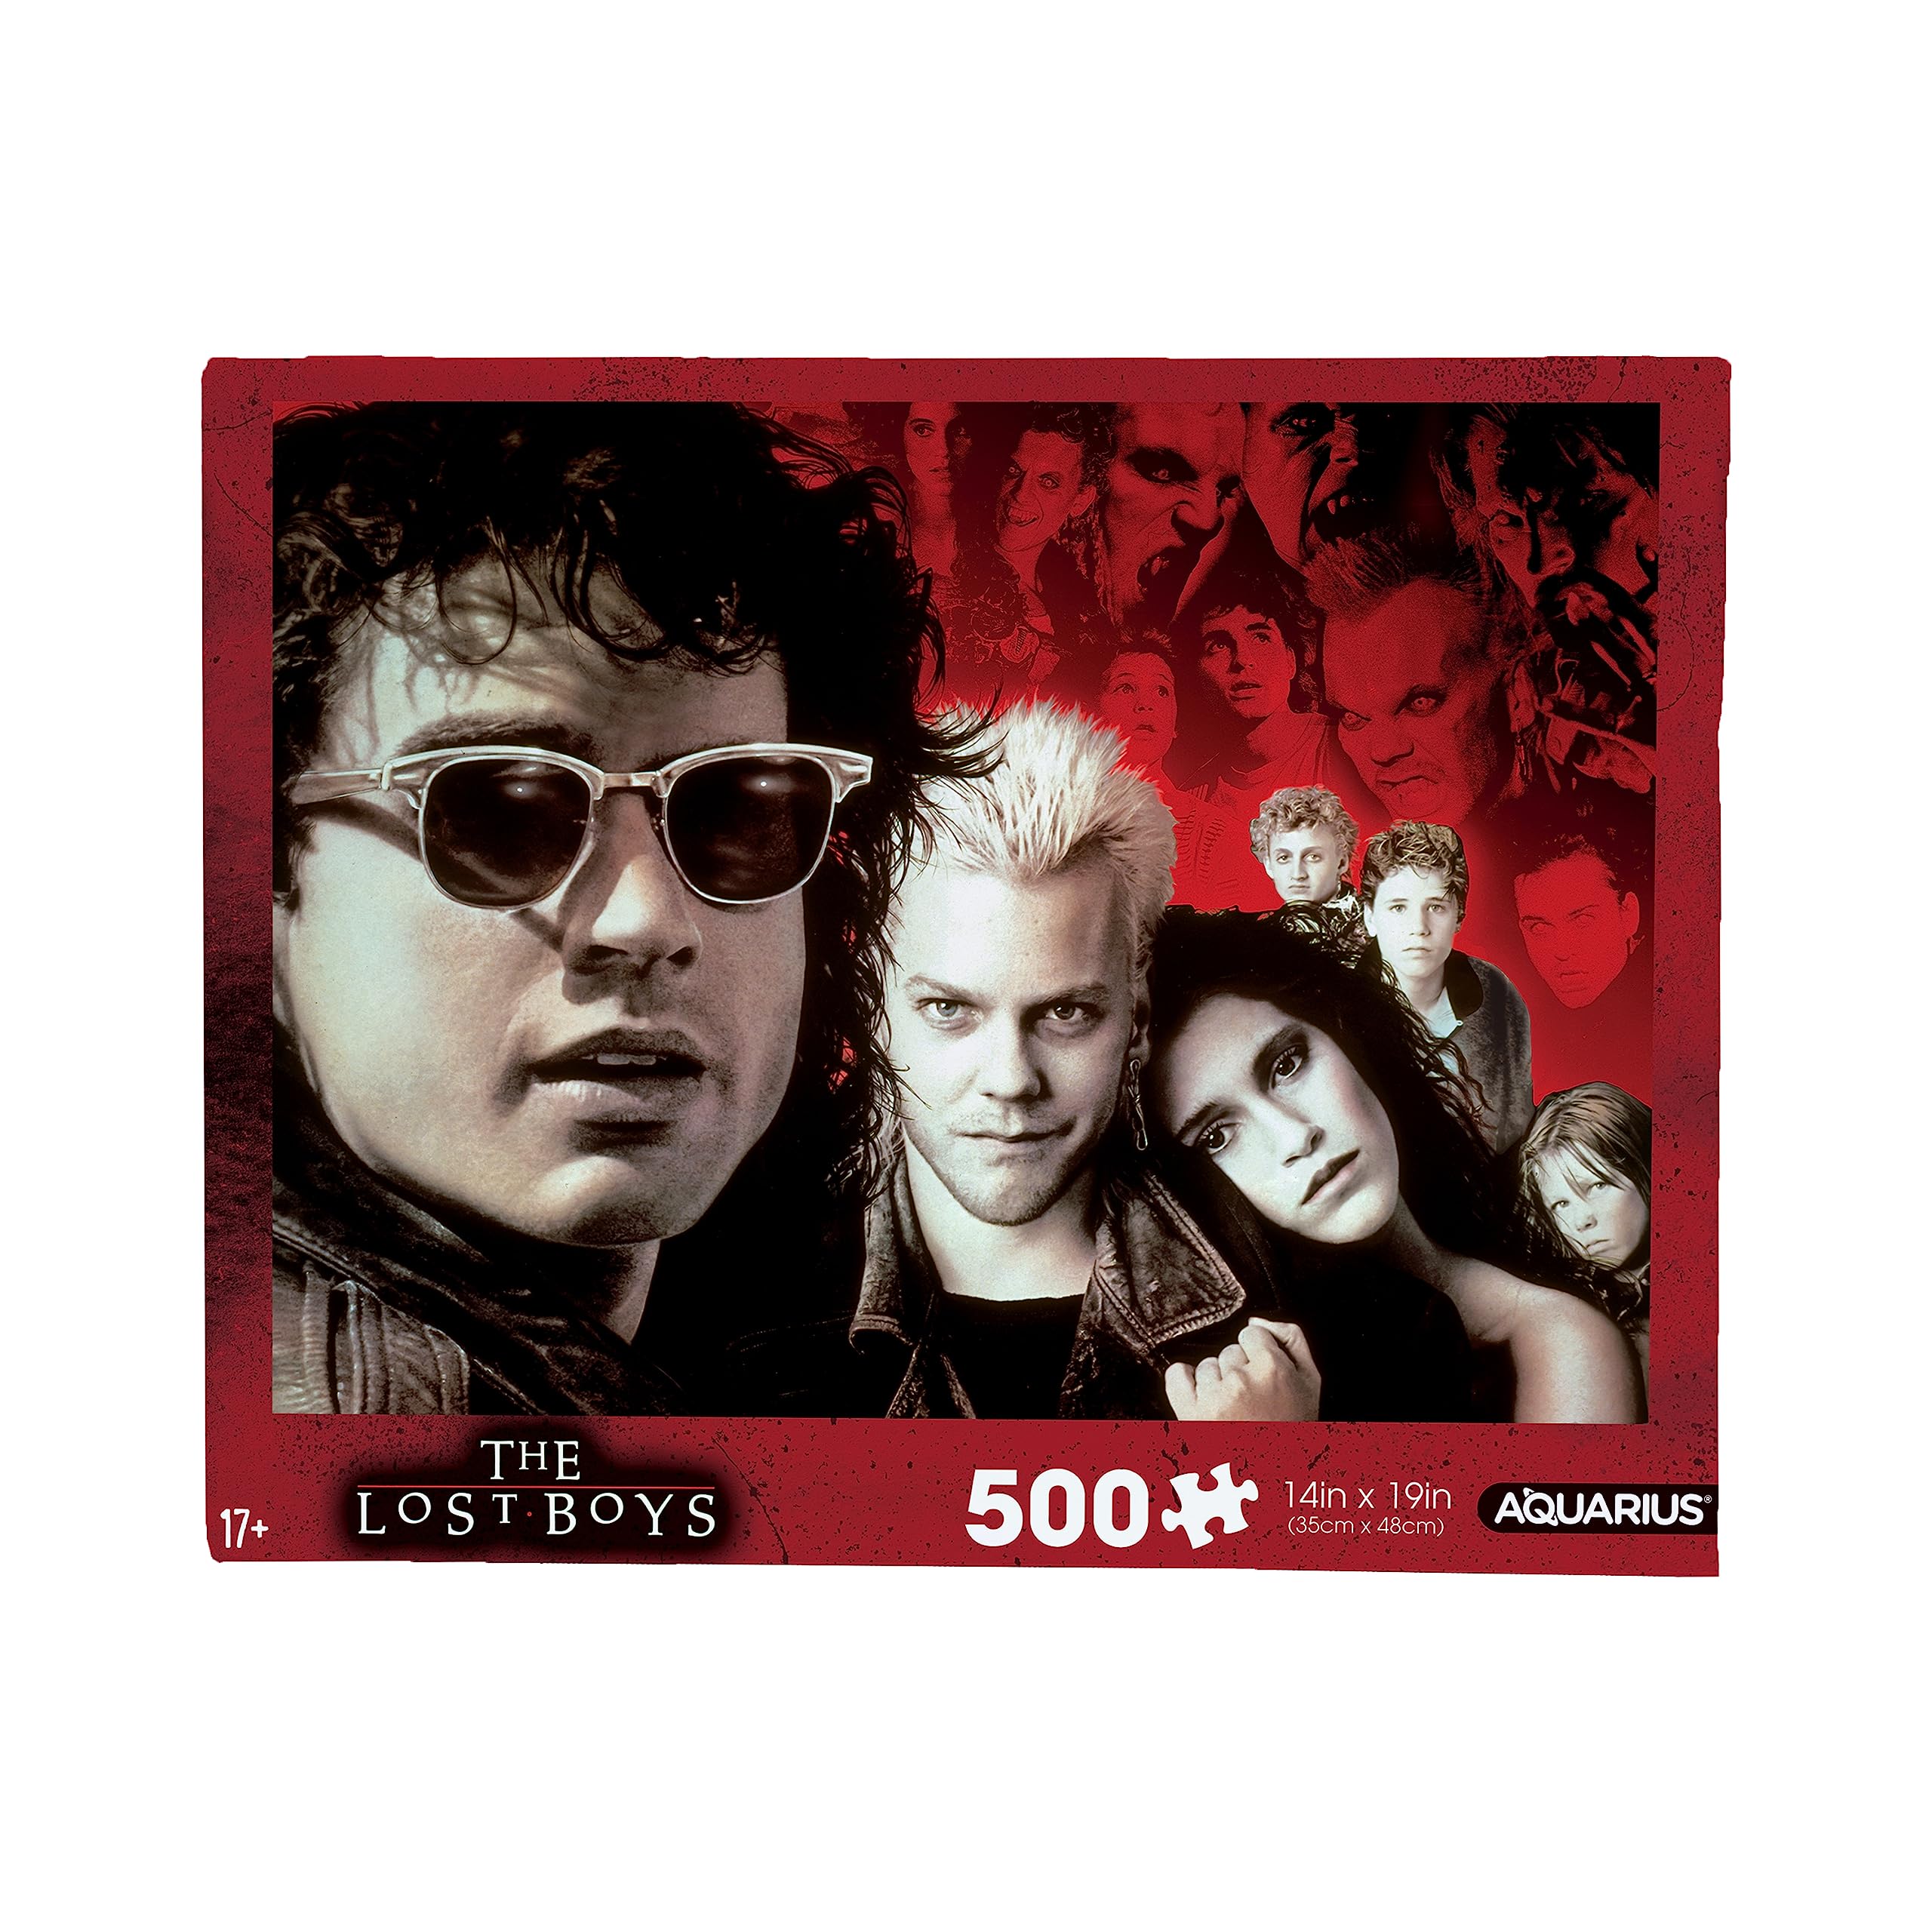 AQUARIUS Lost Boys 500pc Puzzle (500 Piece Jigsaw Puzzle) - Glare Free - Precision Fit - Officially Licensed Lost Boys Movie 500pc Puzzle Movie Merchandise & Collectibles - 14x19 Inches